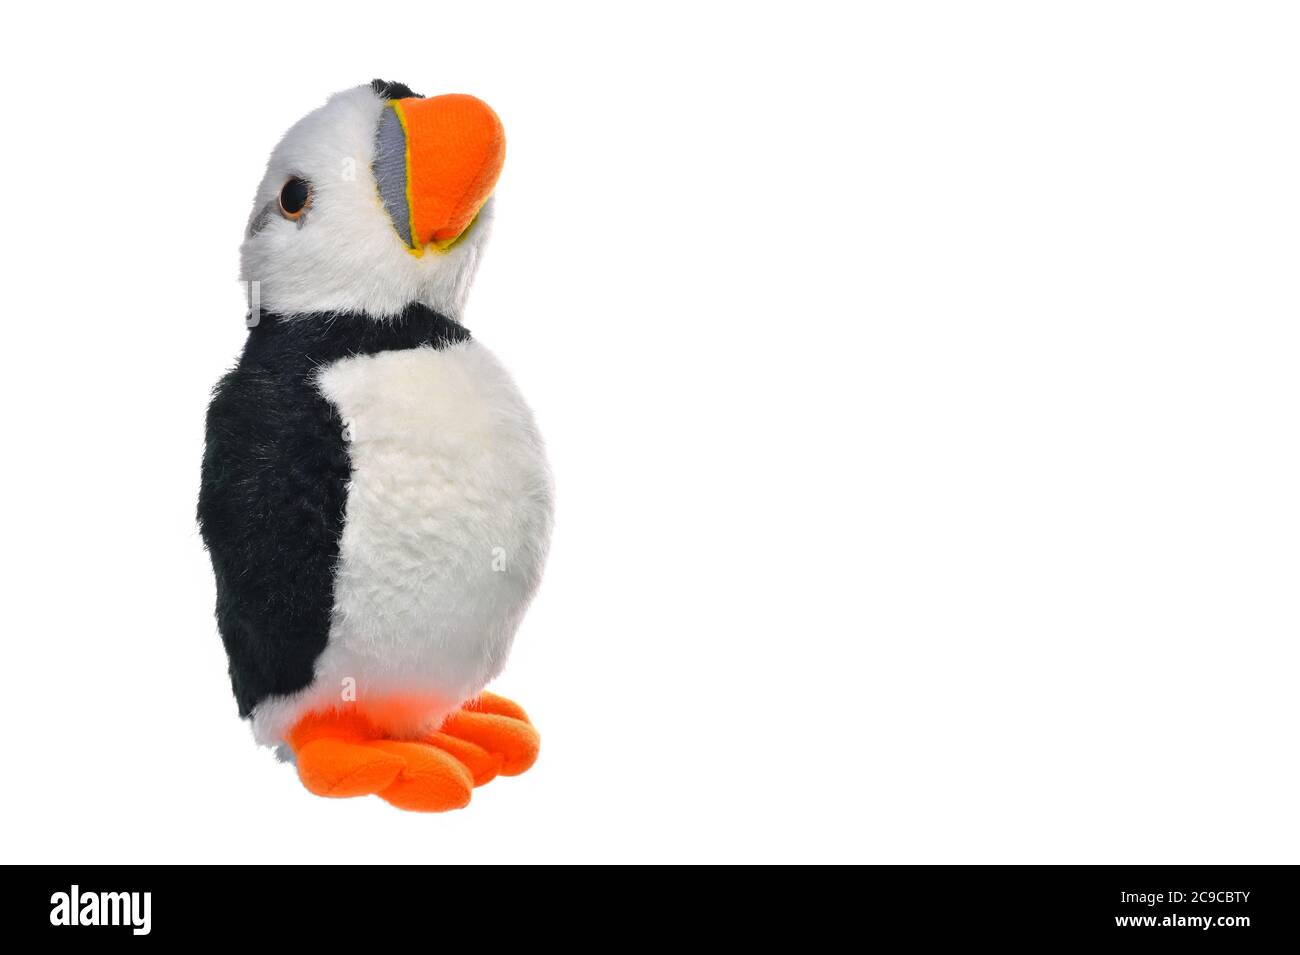 Puffin bird soft toy, seabird animal isolated on white background with copy space. Stock Photo